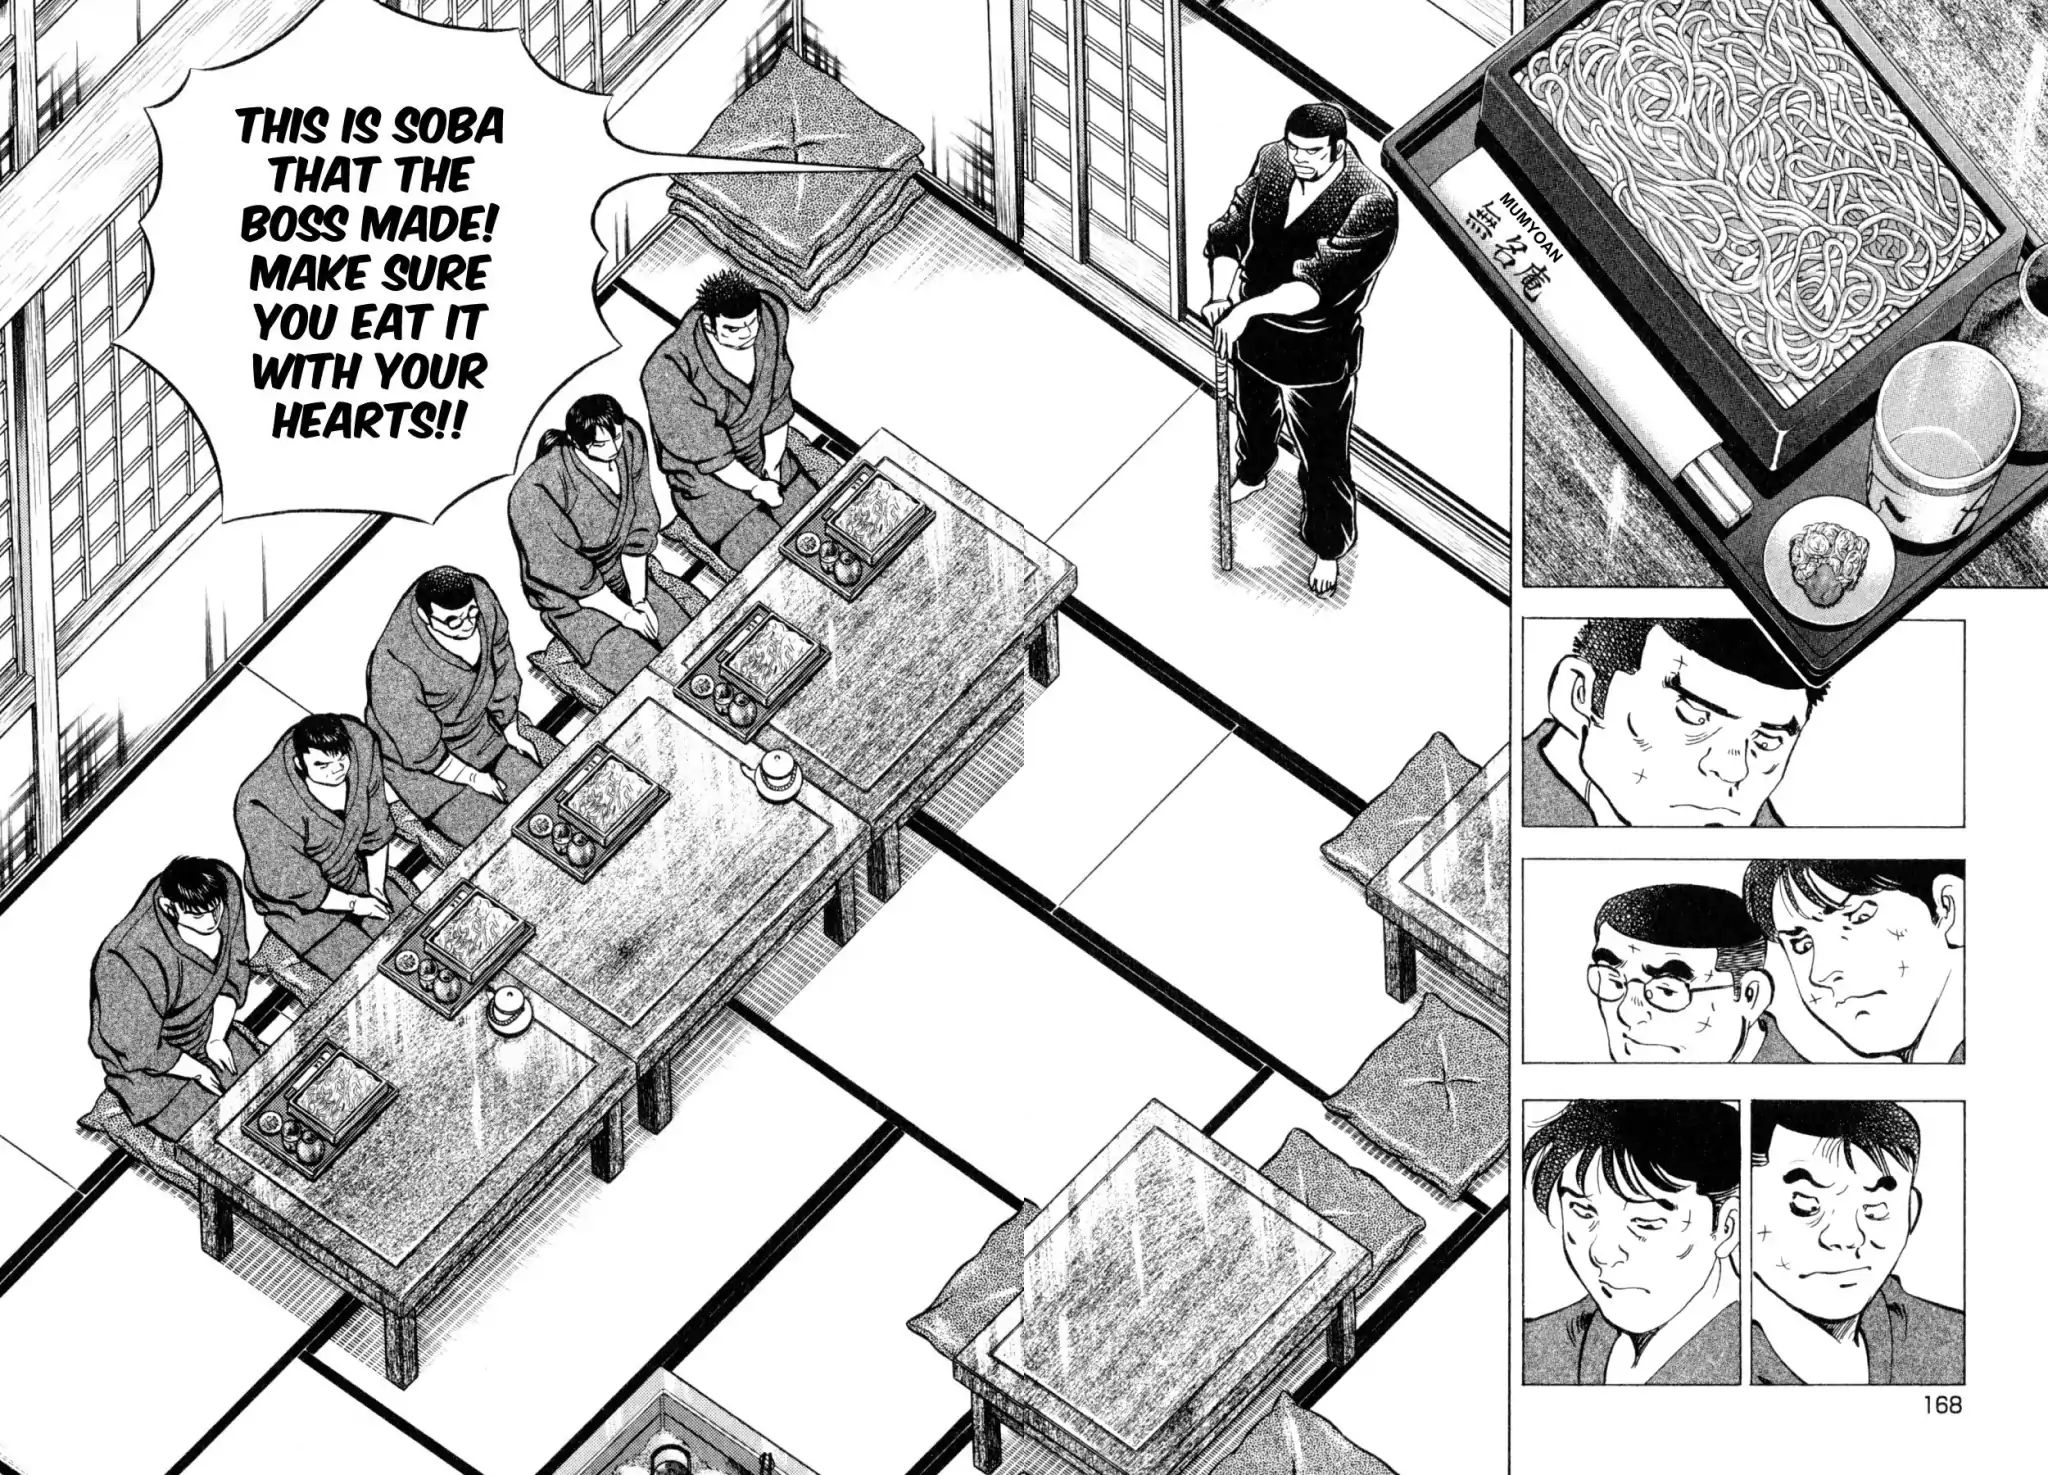 Shoku King VOL.26 CHAPTER 243: THE RULES OF SOBA NOODLES